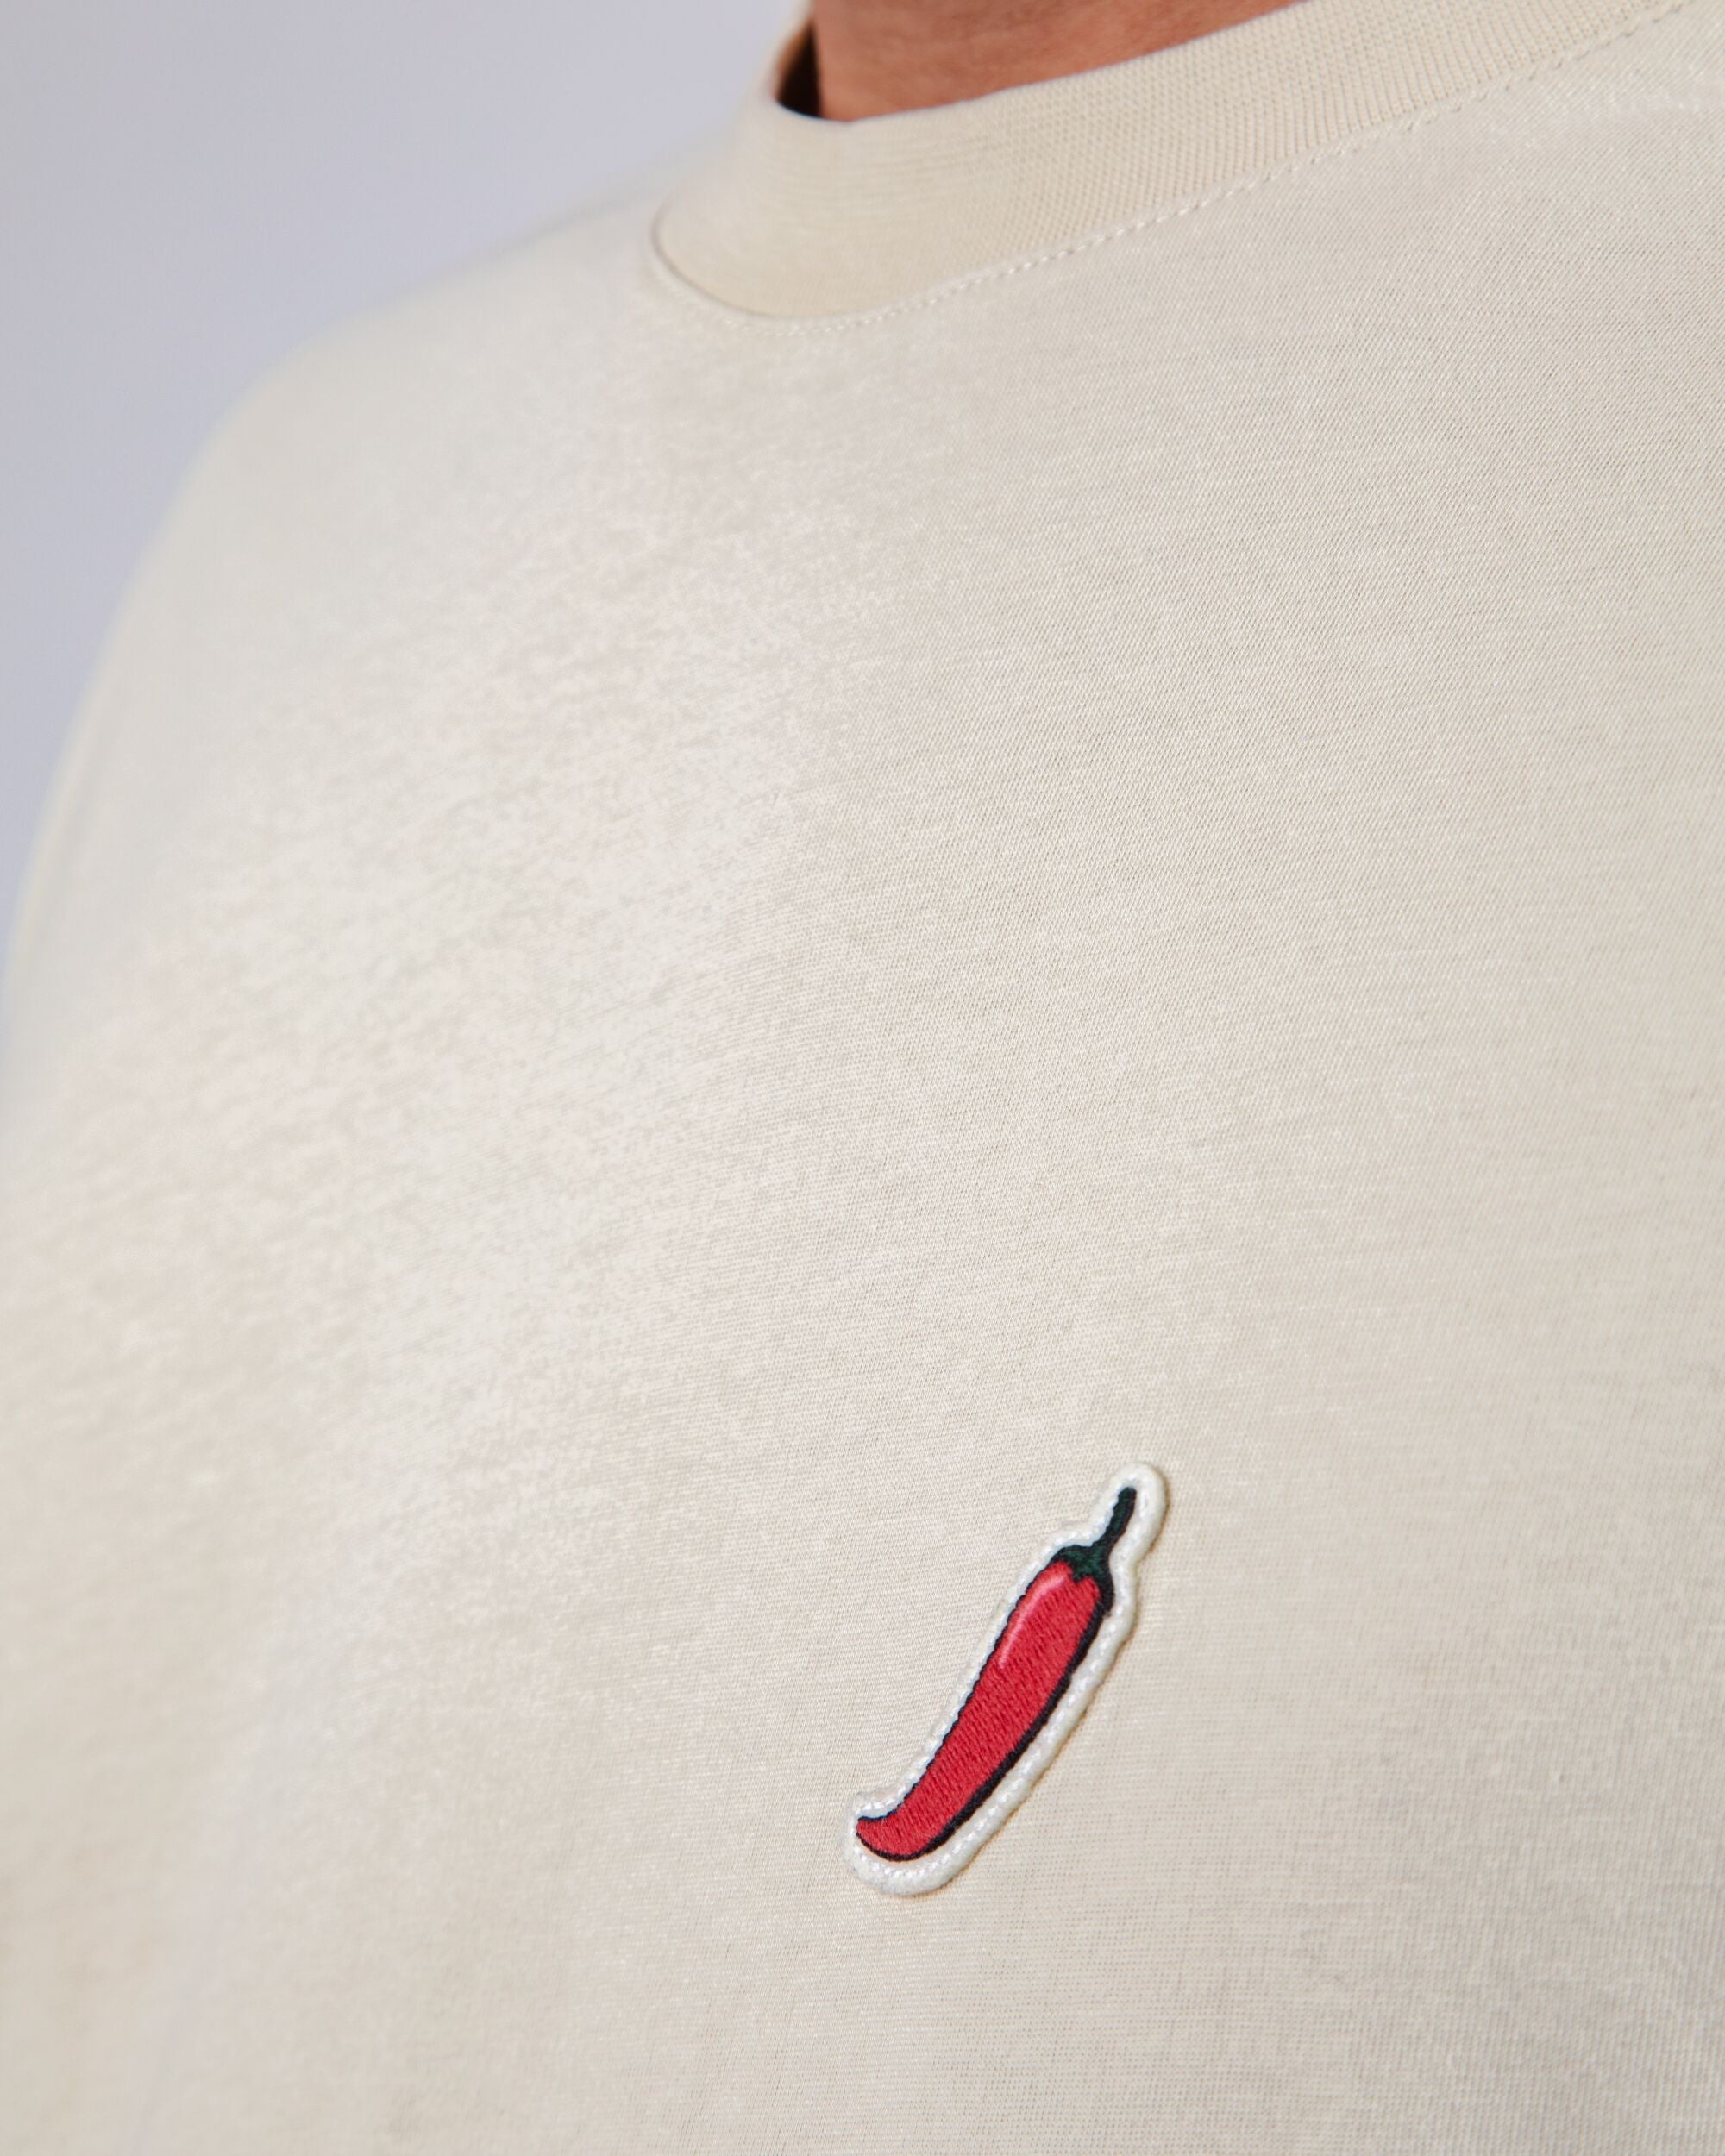 Beige T-shirt Red Chilli made from 100% organic cotton from Brava Fabrics